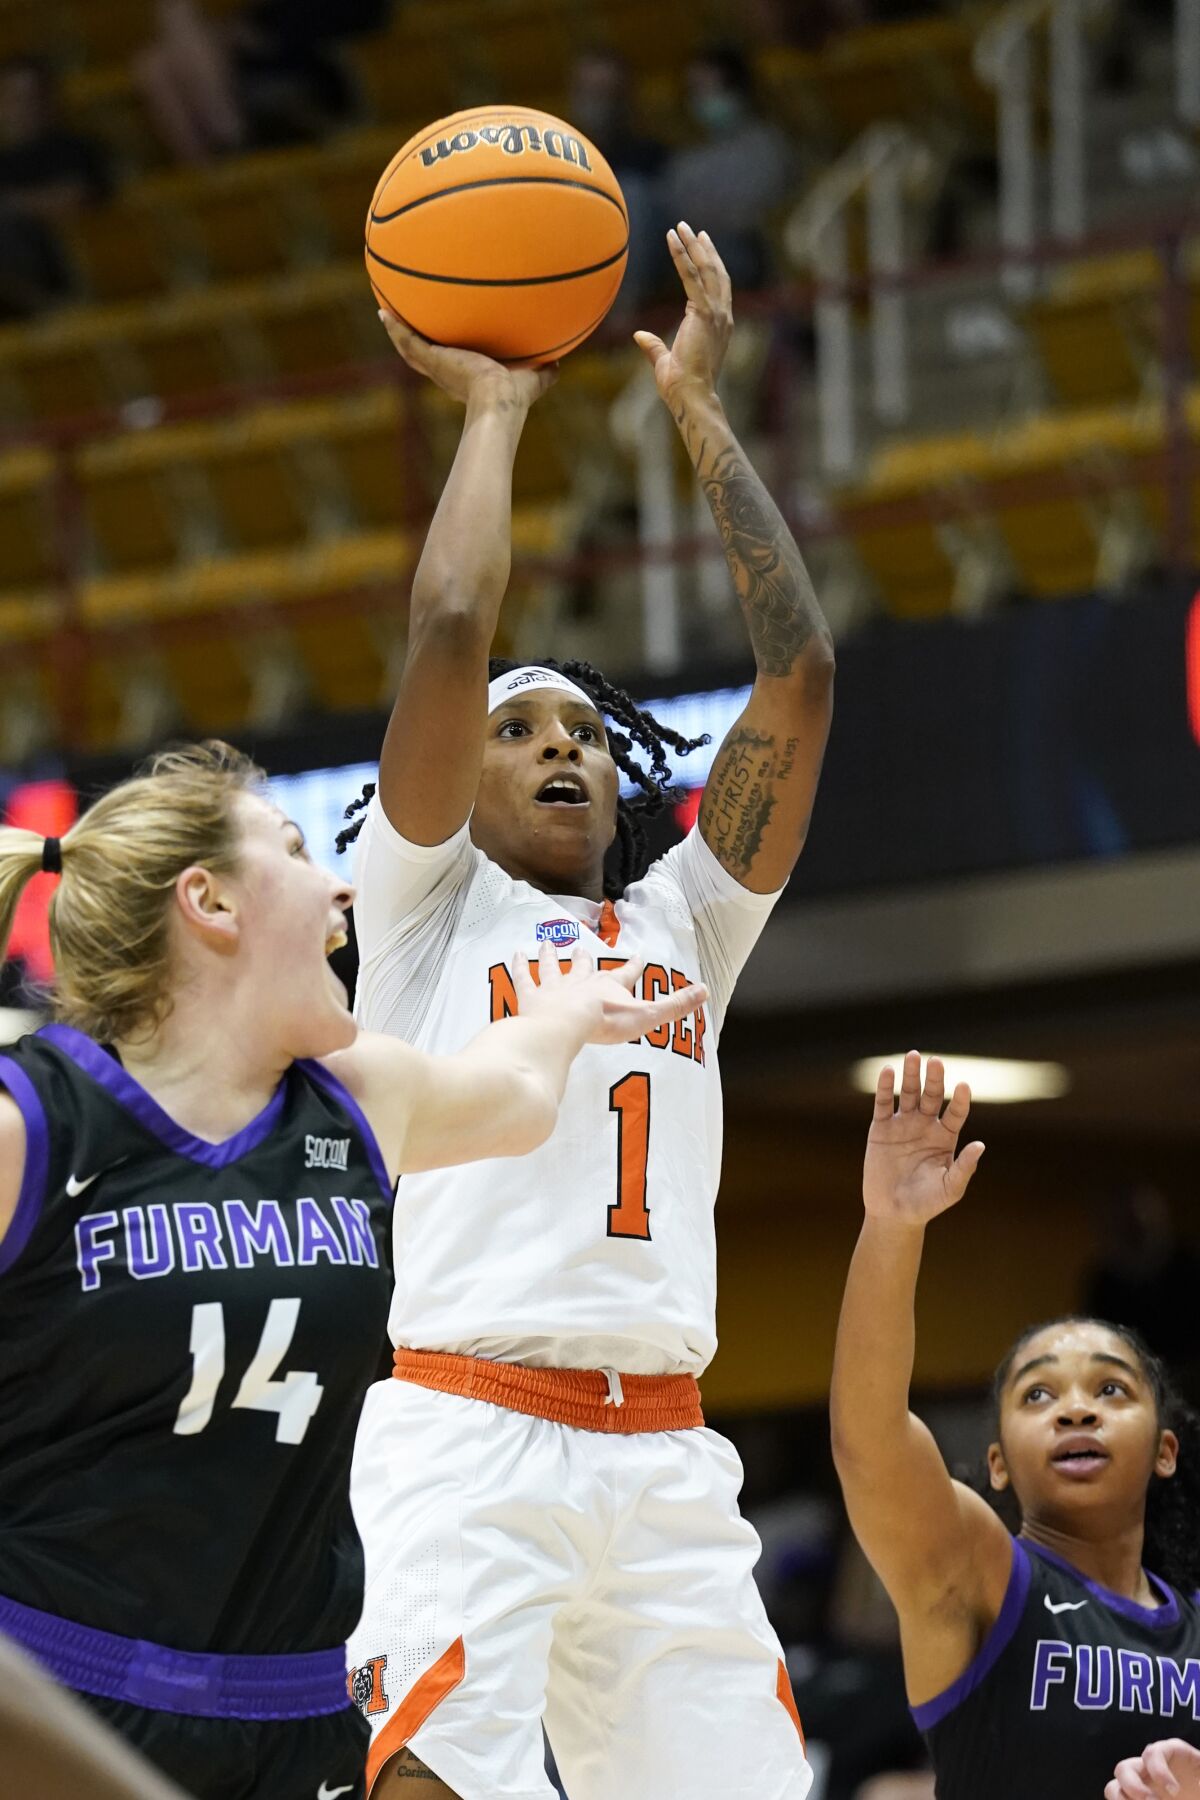 Mercer guard Amoria Neal-Tysor (1) shoots past Furman forward Grace van Rij (14) in the first half of an NCAA college basketball championship game for the Southern Conference tournament, Sunday, March 6, 2022, in Asheville, N.C. (AP Photo/Kathy Kmonicek)